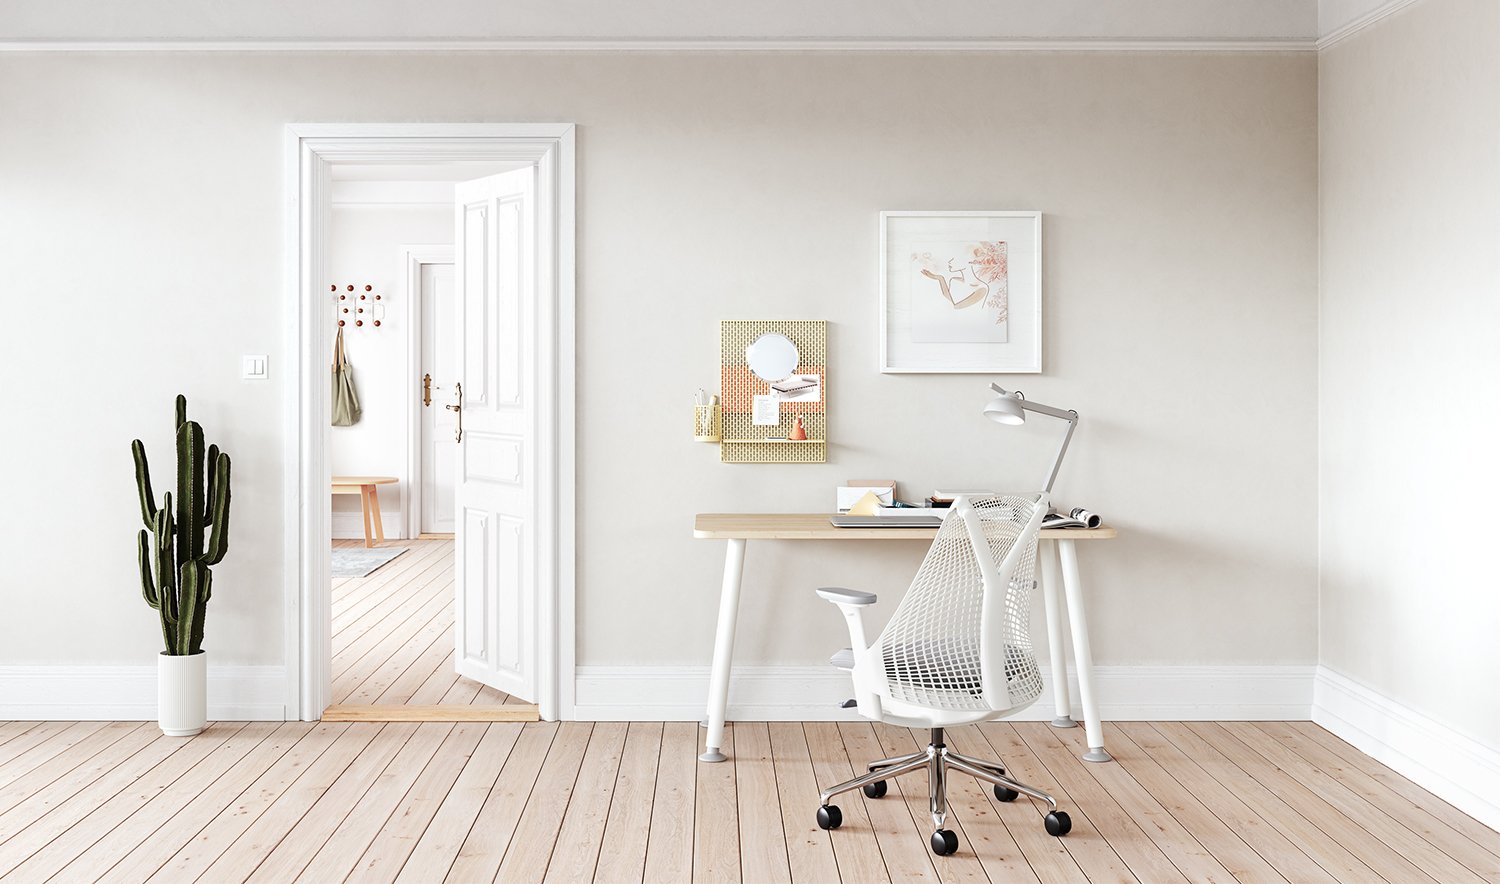 A white and grey Sayl chair alongside a Memo desk in a home office environment